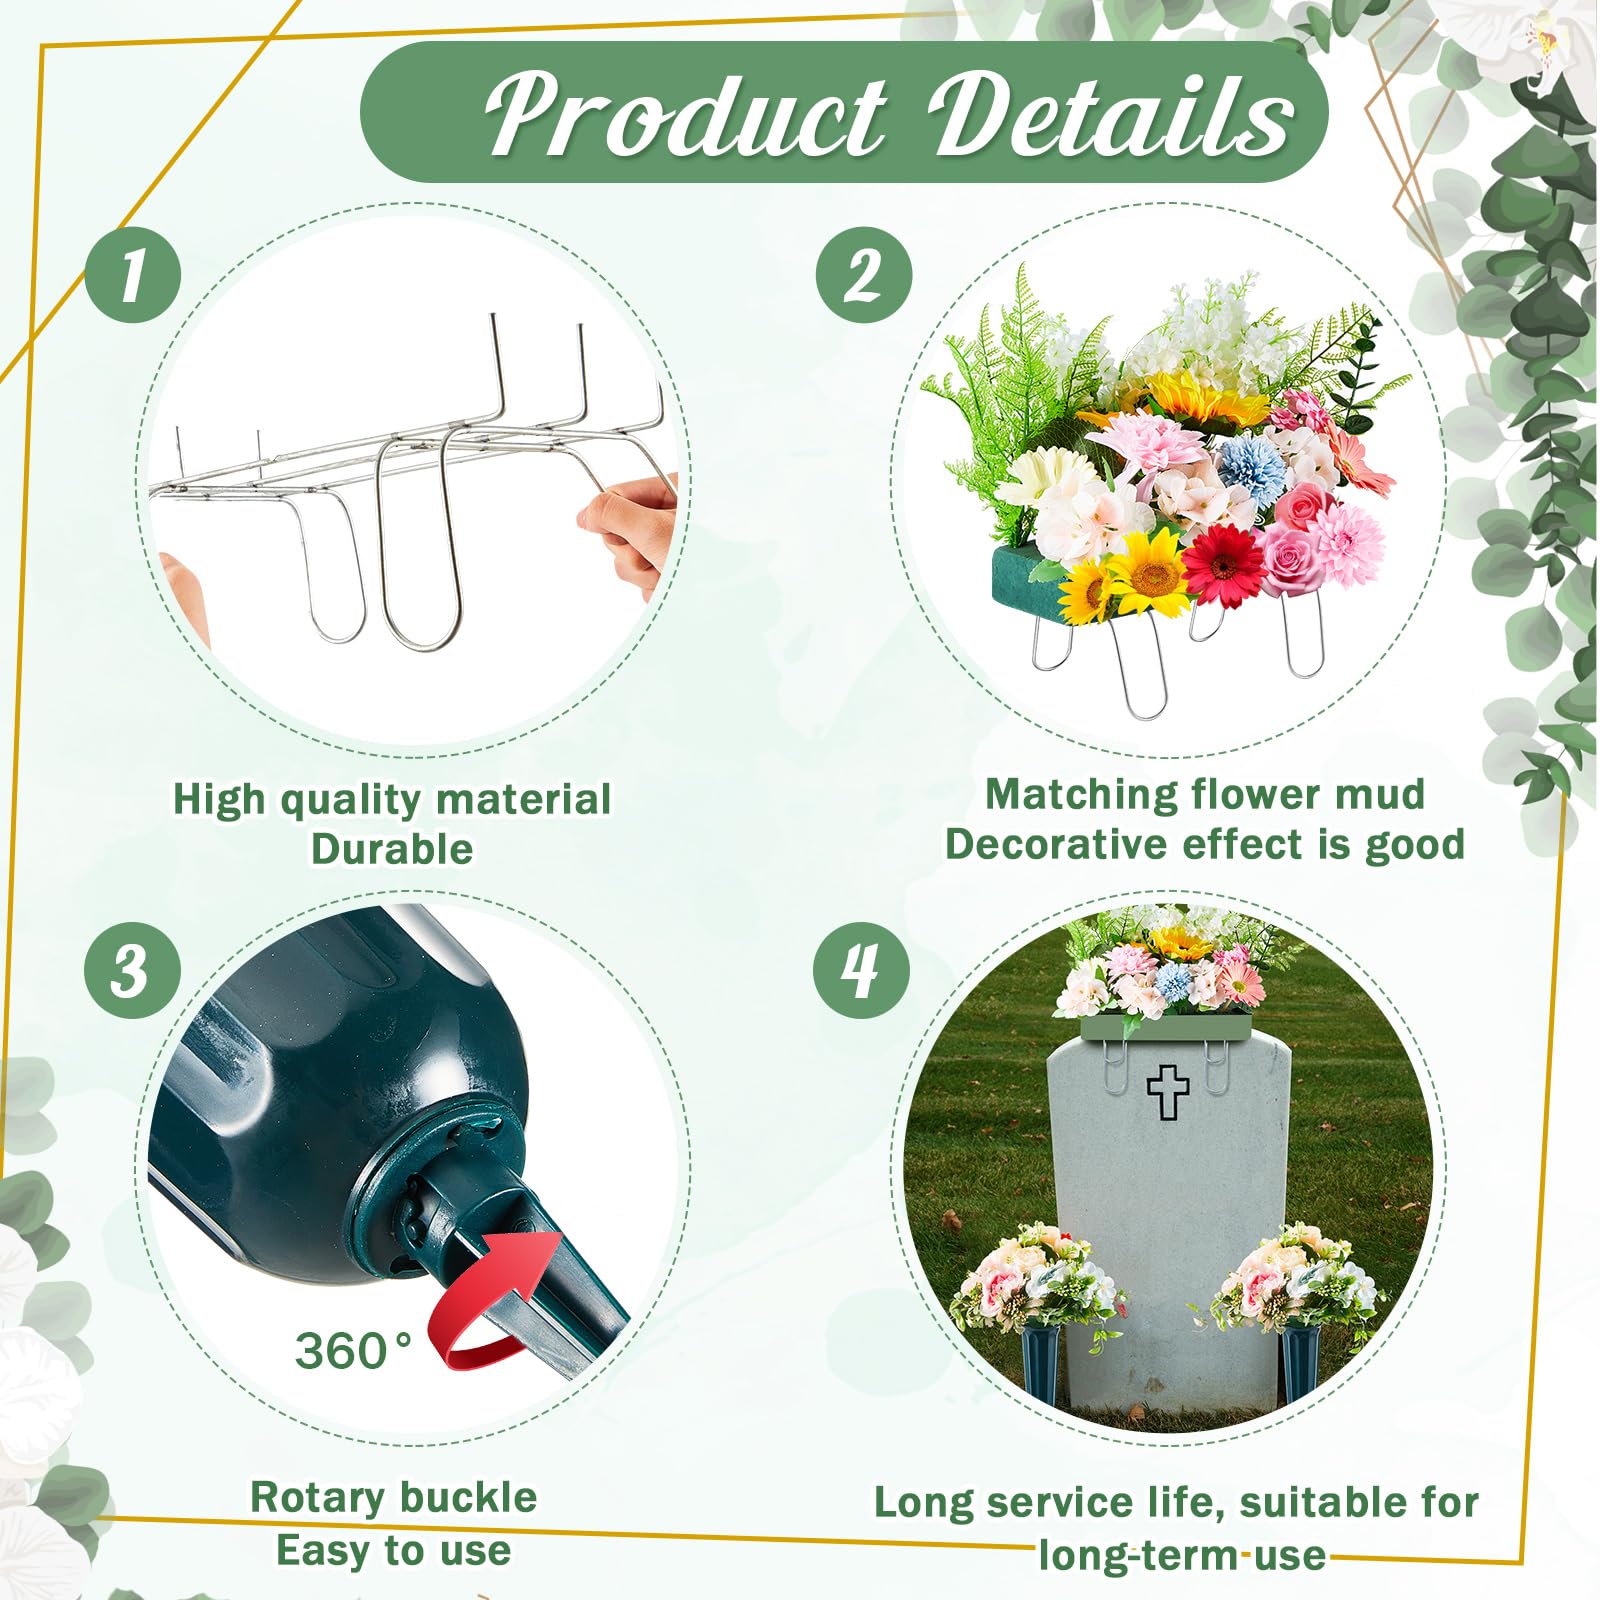 Zonon 3 Pcs Headstone Flower Saddle and Cemetery Vases with Spikes Set Includes 1 Pcs 12 Inch Gravestone Saddle with Floral Foam 2 Pcs Grave Flower Holder with Foam Inserts for Cemetery Decorations